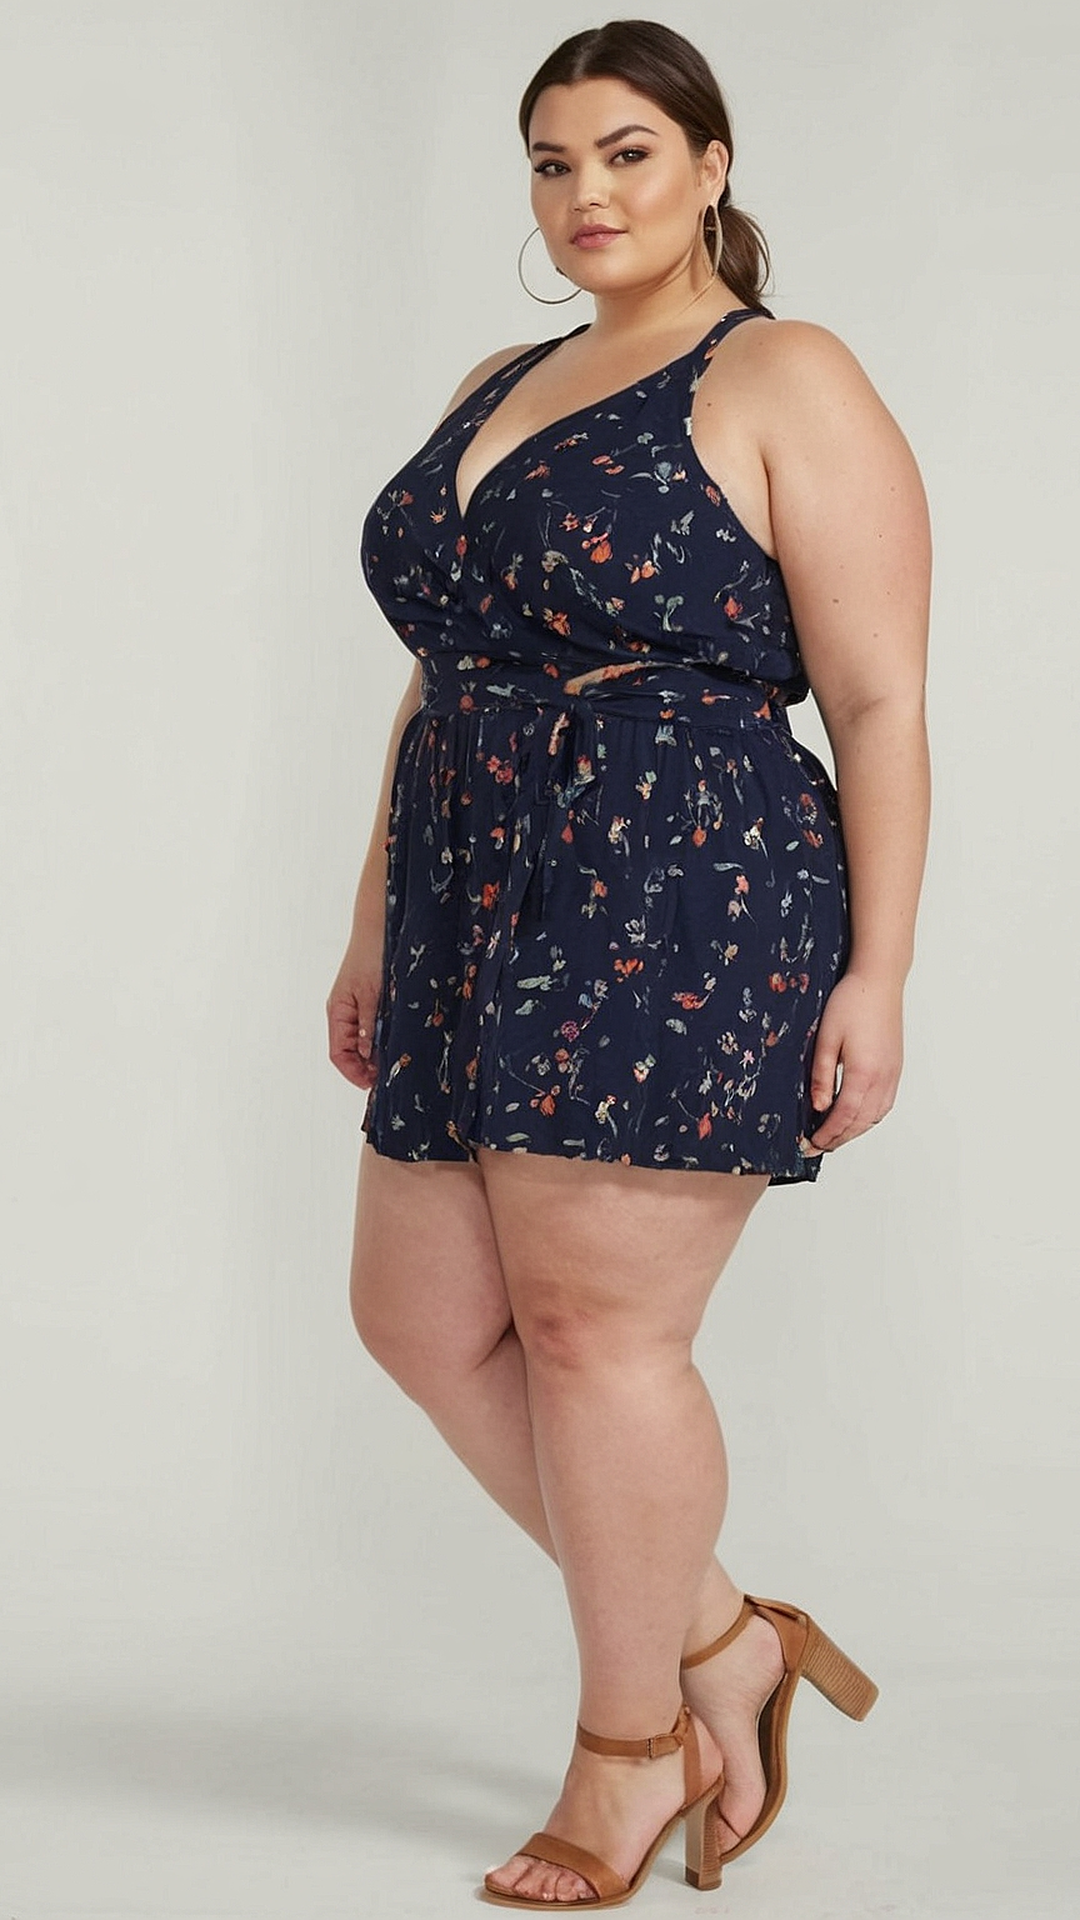 Trendy Plus Size Guide for Hot Summer Days